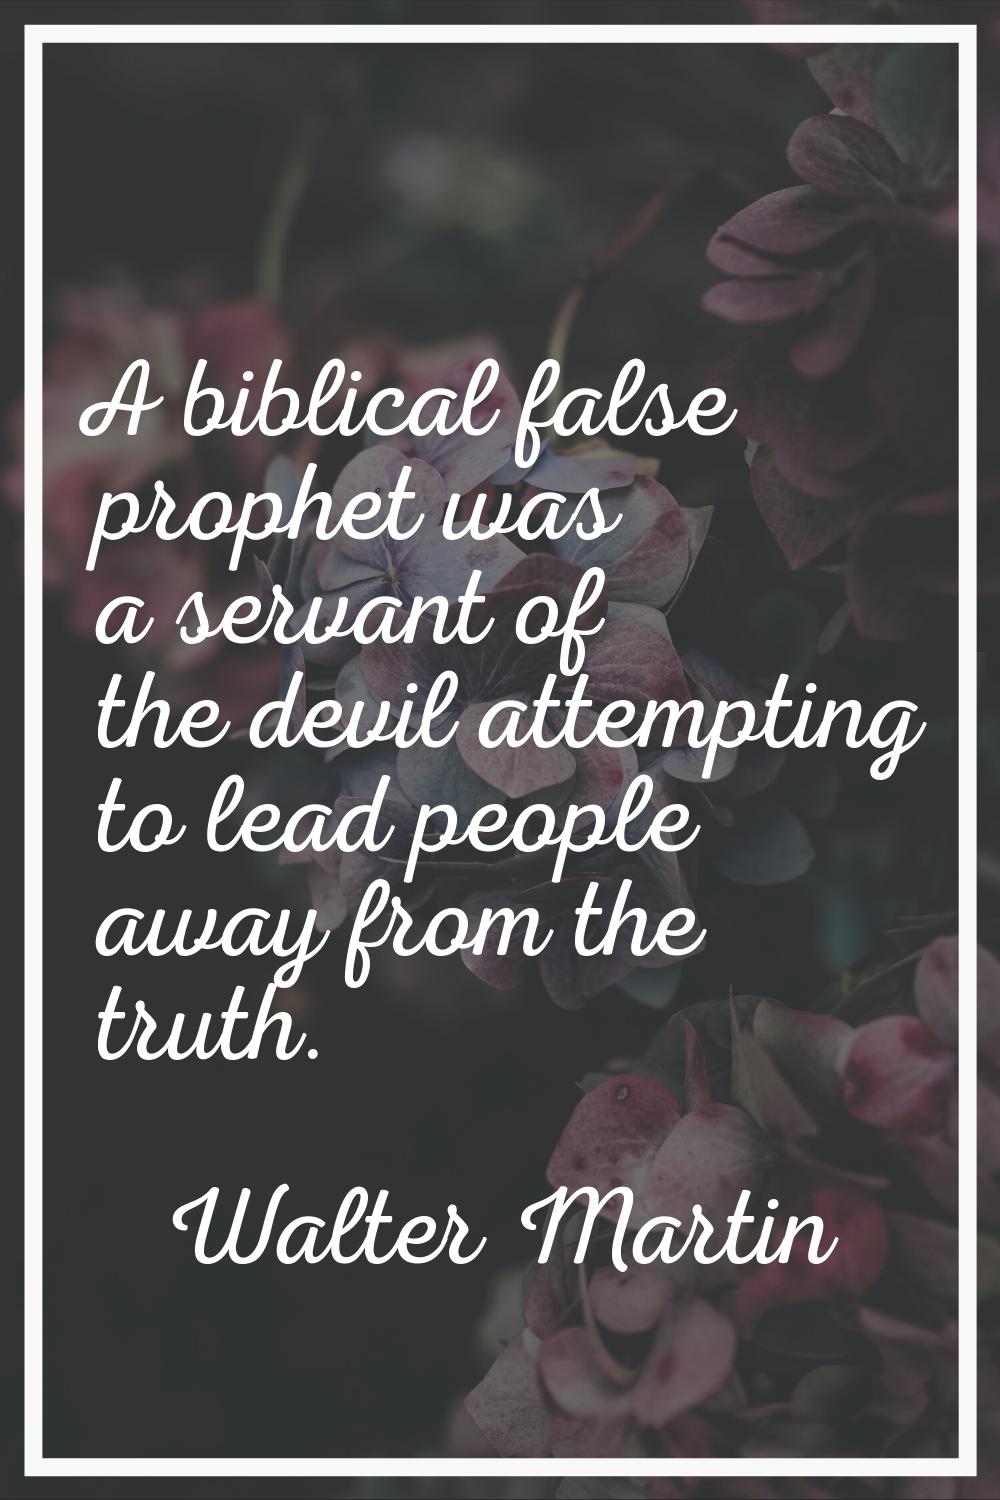 A biblical false prophet was a servant of the devil attempting to lead people away from the truth.